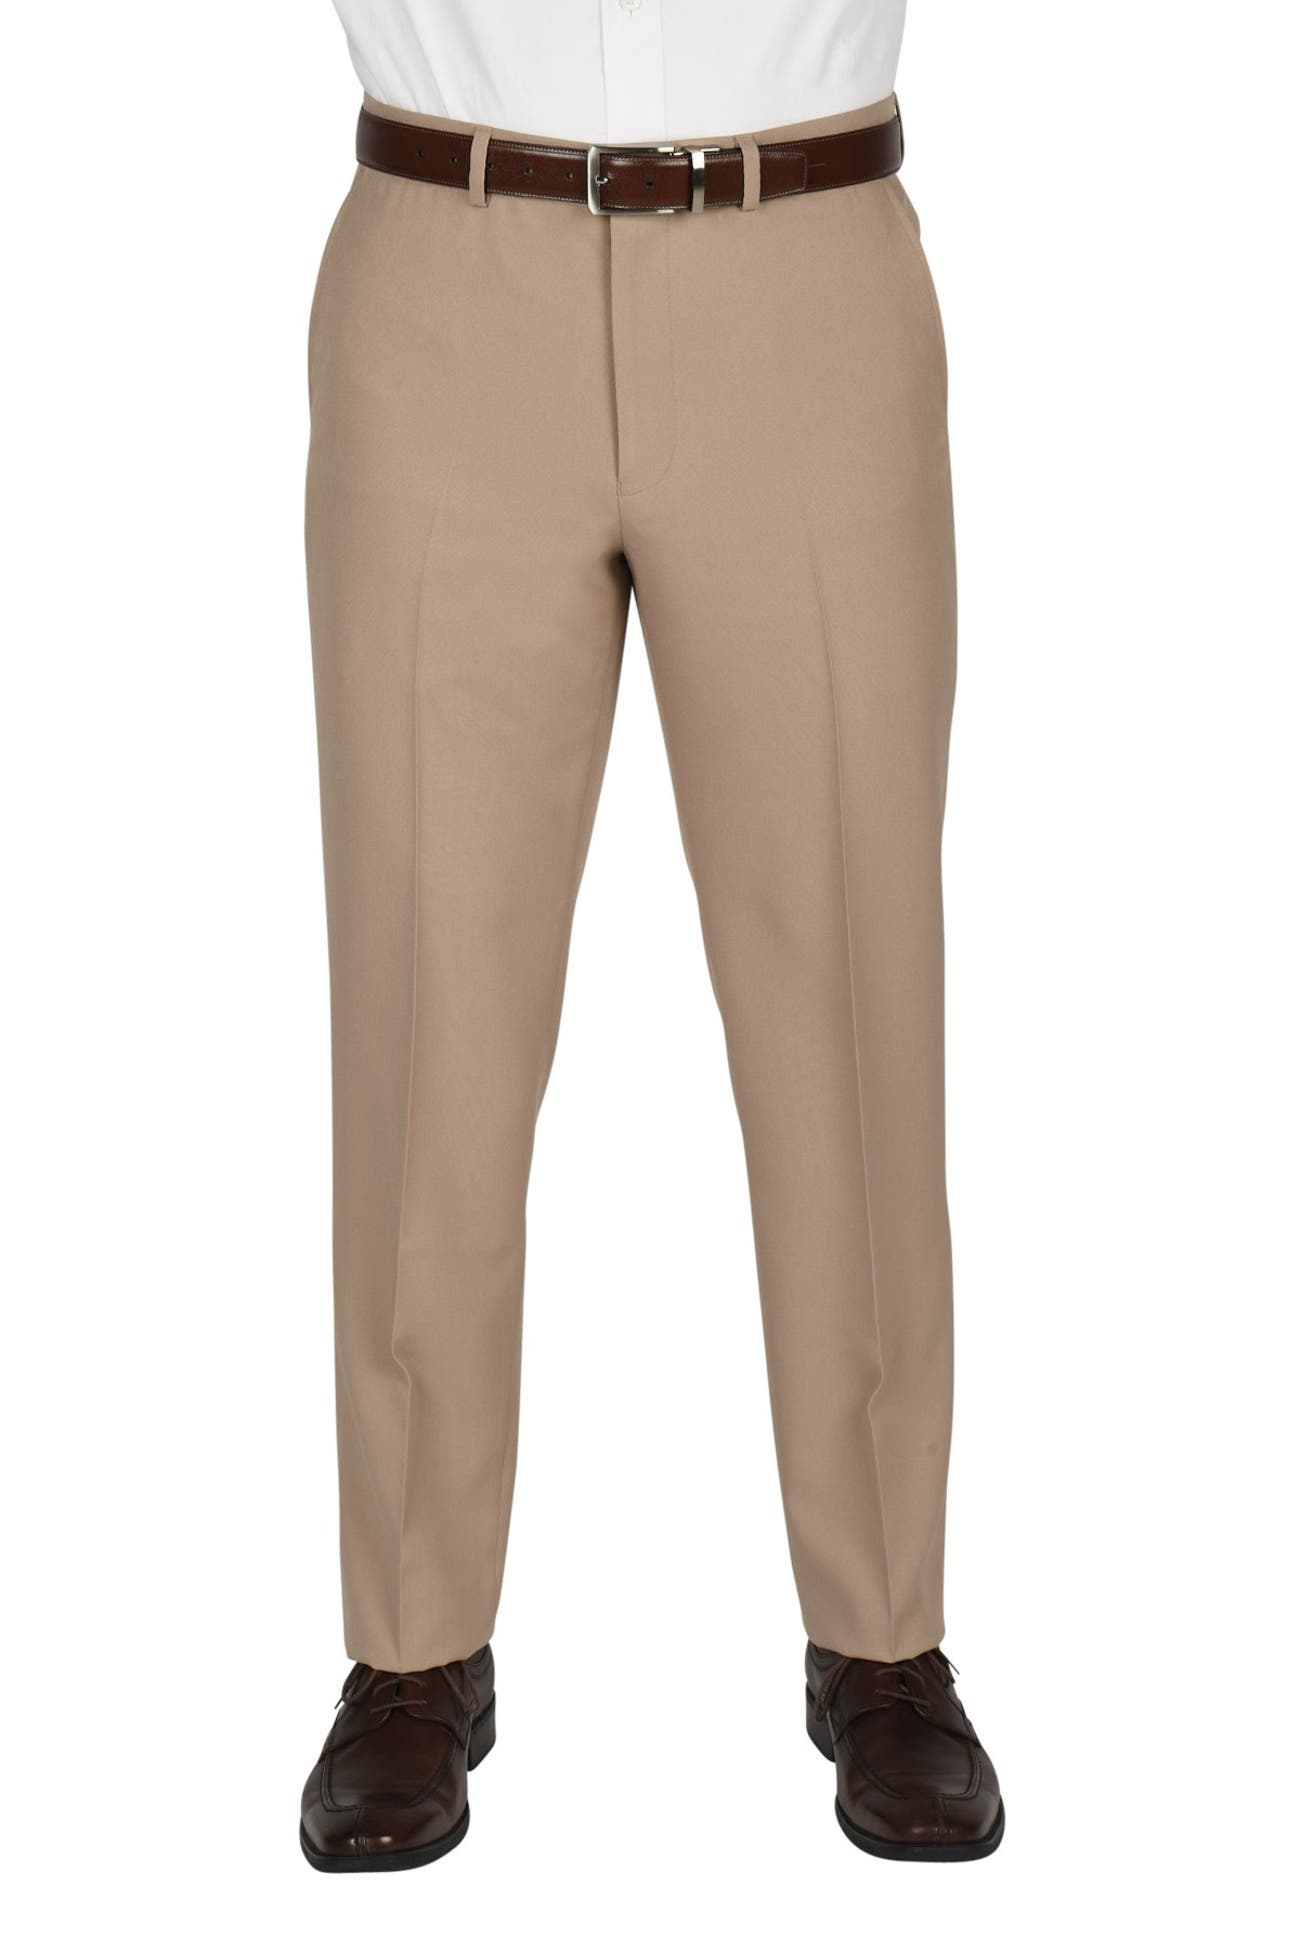 Dockers | Solid Flat Front Stretch Waistband Slim Fit Dress Pants - 30 ...